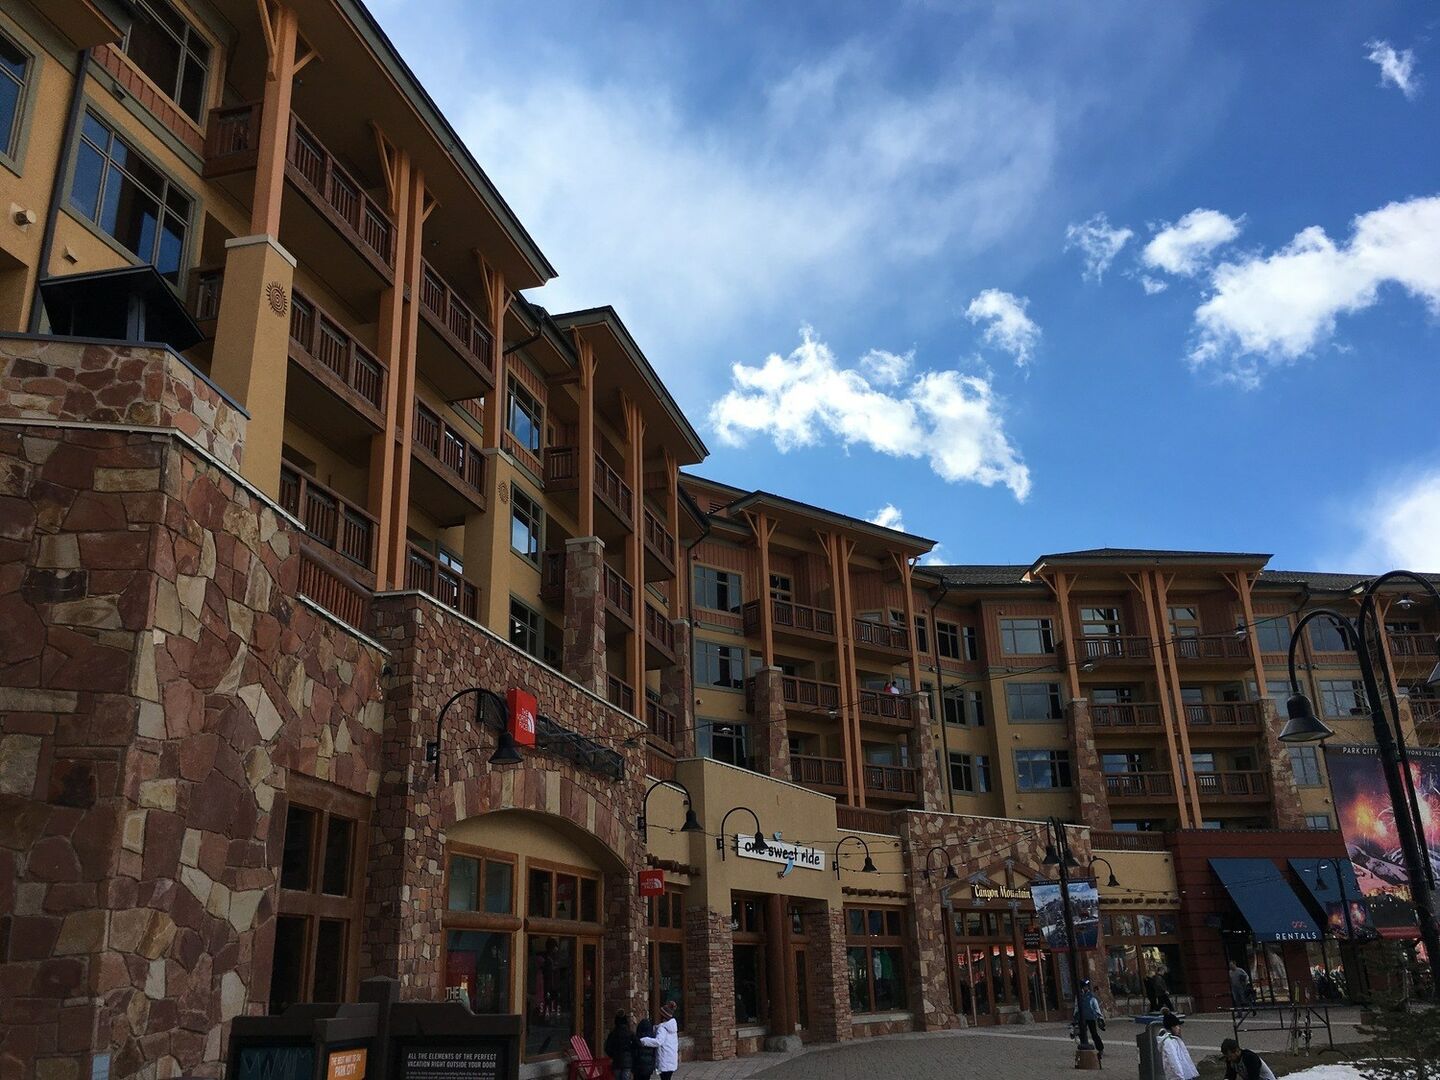 Resort ski school, ski rentals and ski shop are all within the property (just downstairs)